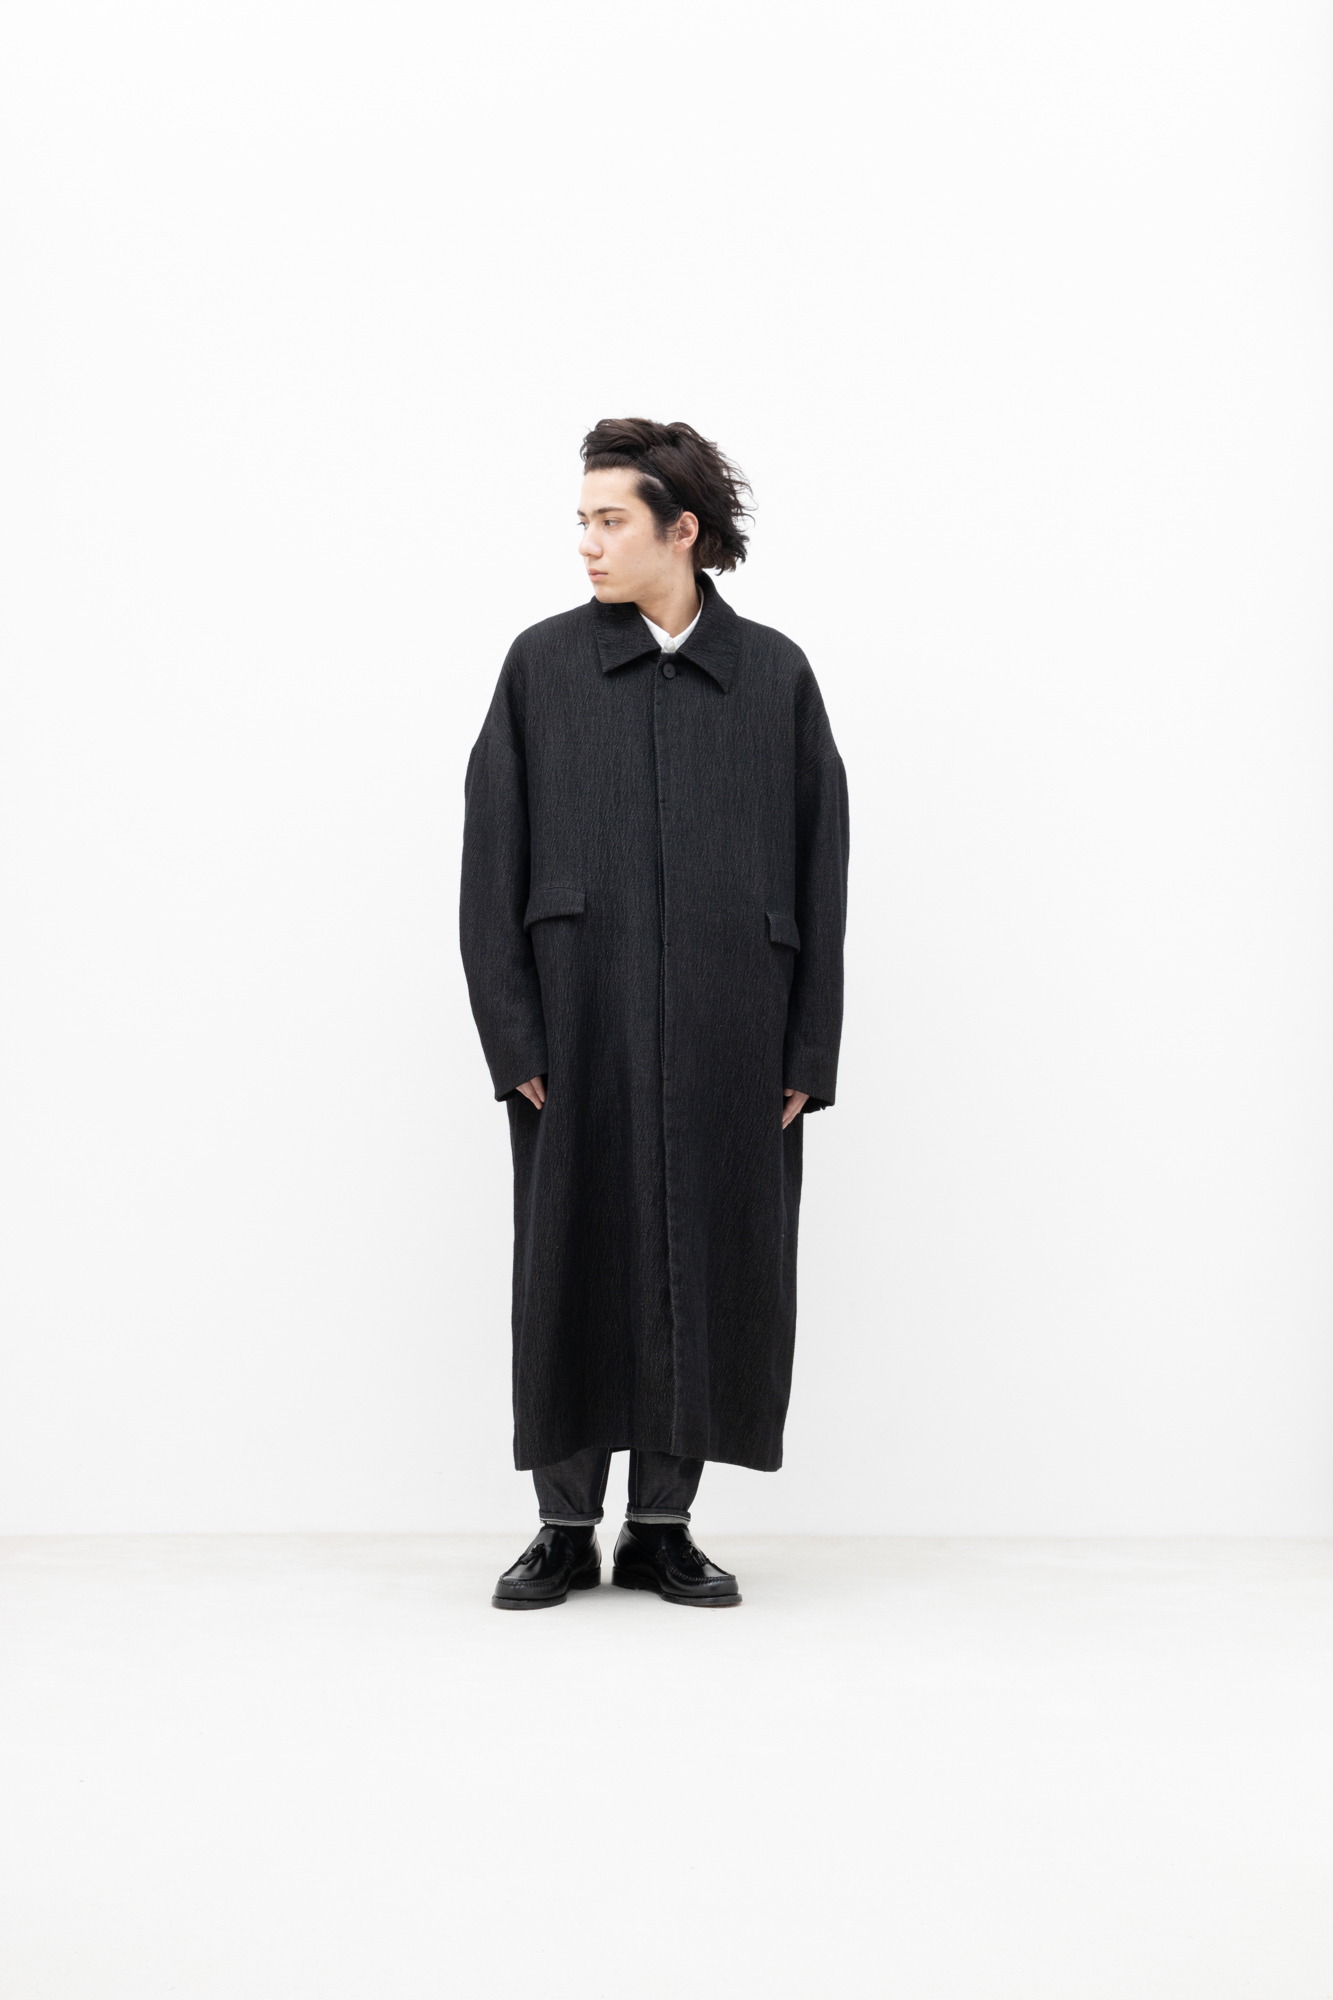 No. 069 | 2020 AW MENS | LOOK | FIRMUM